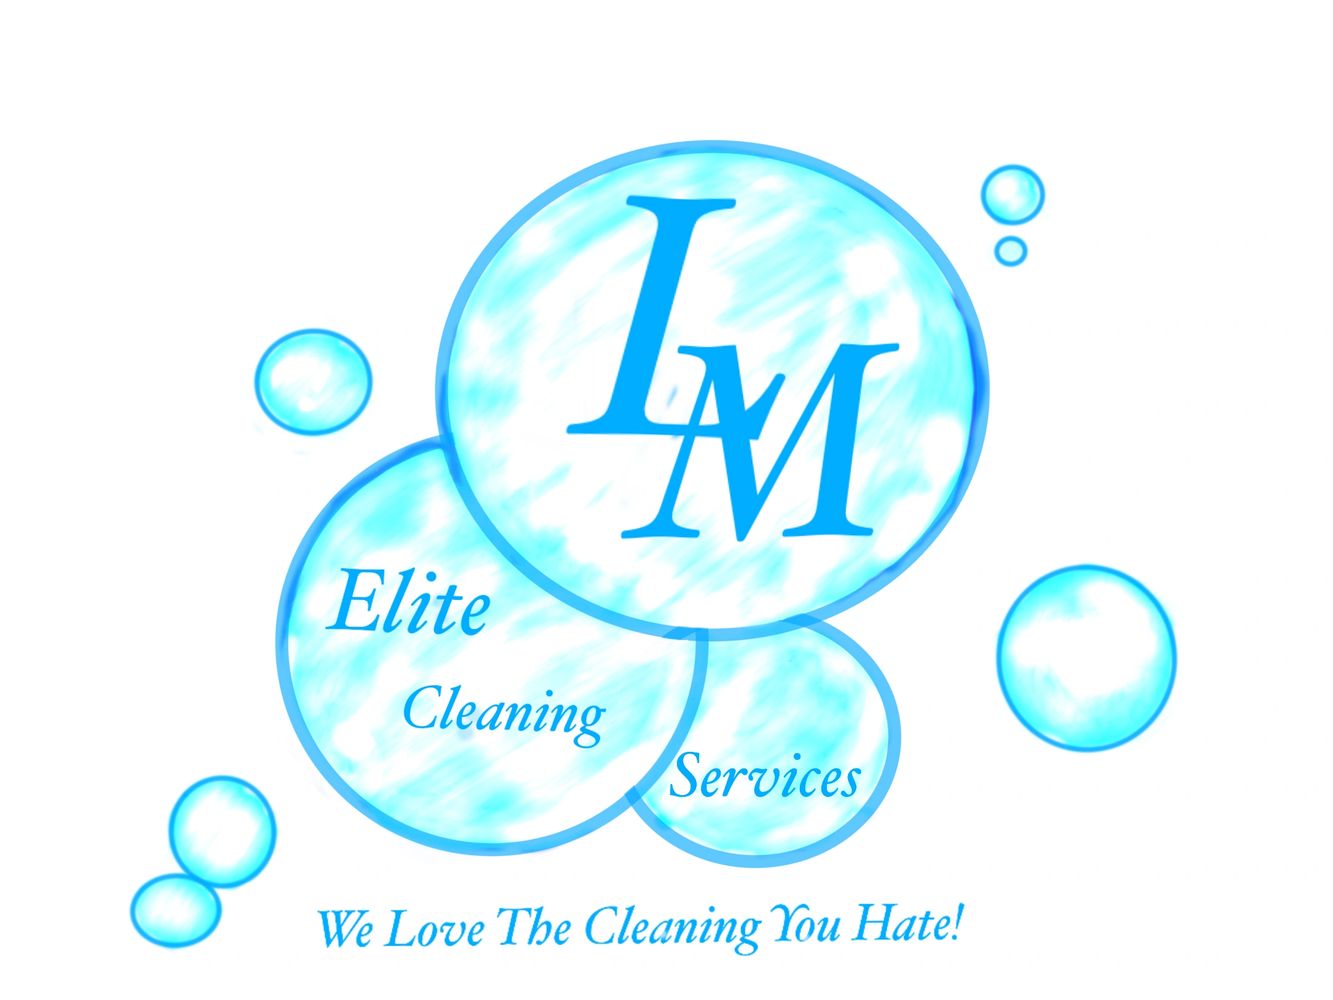 We Love The Cleaning You Hate!